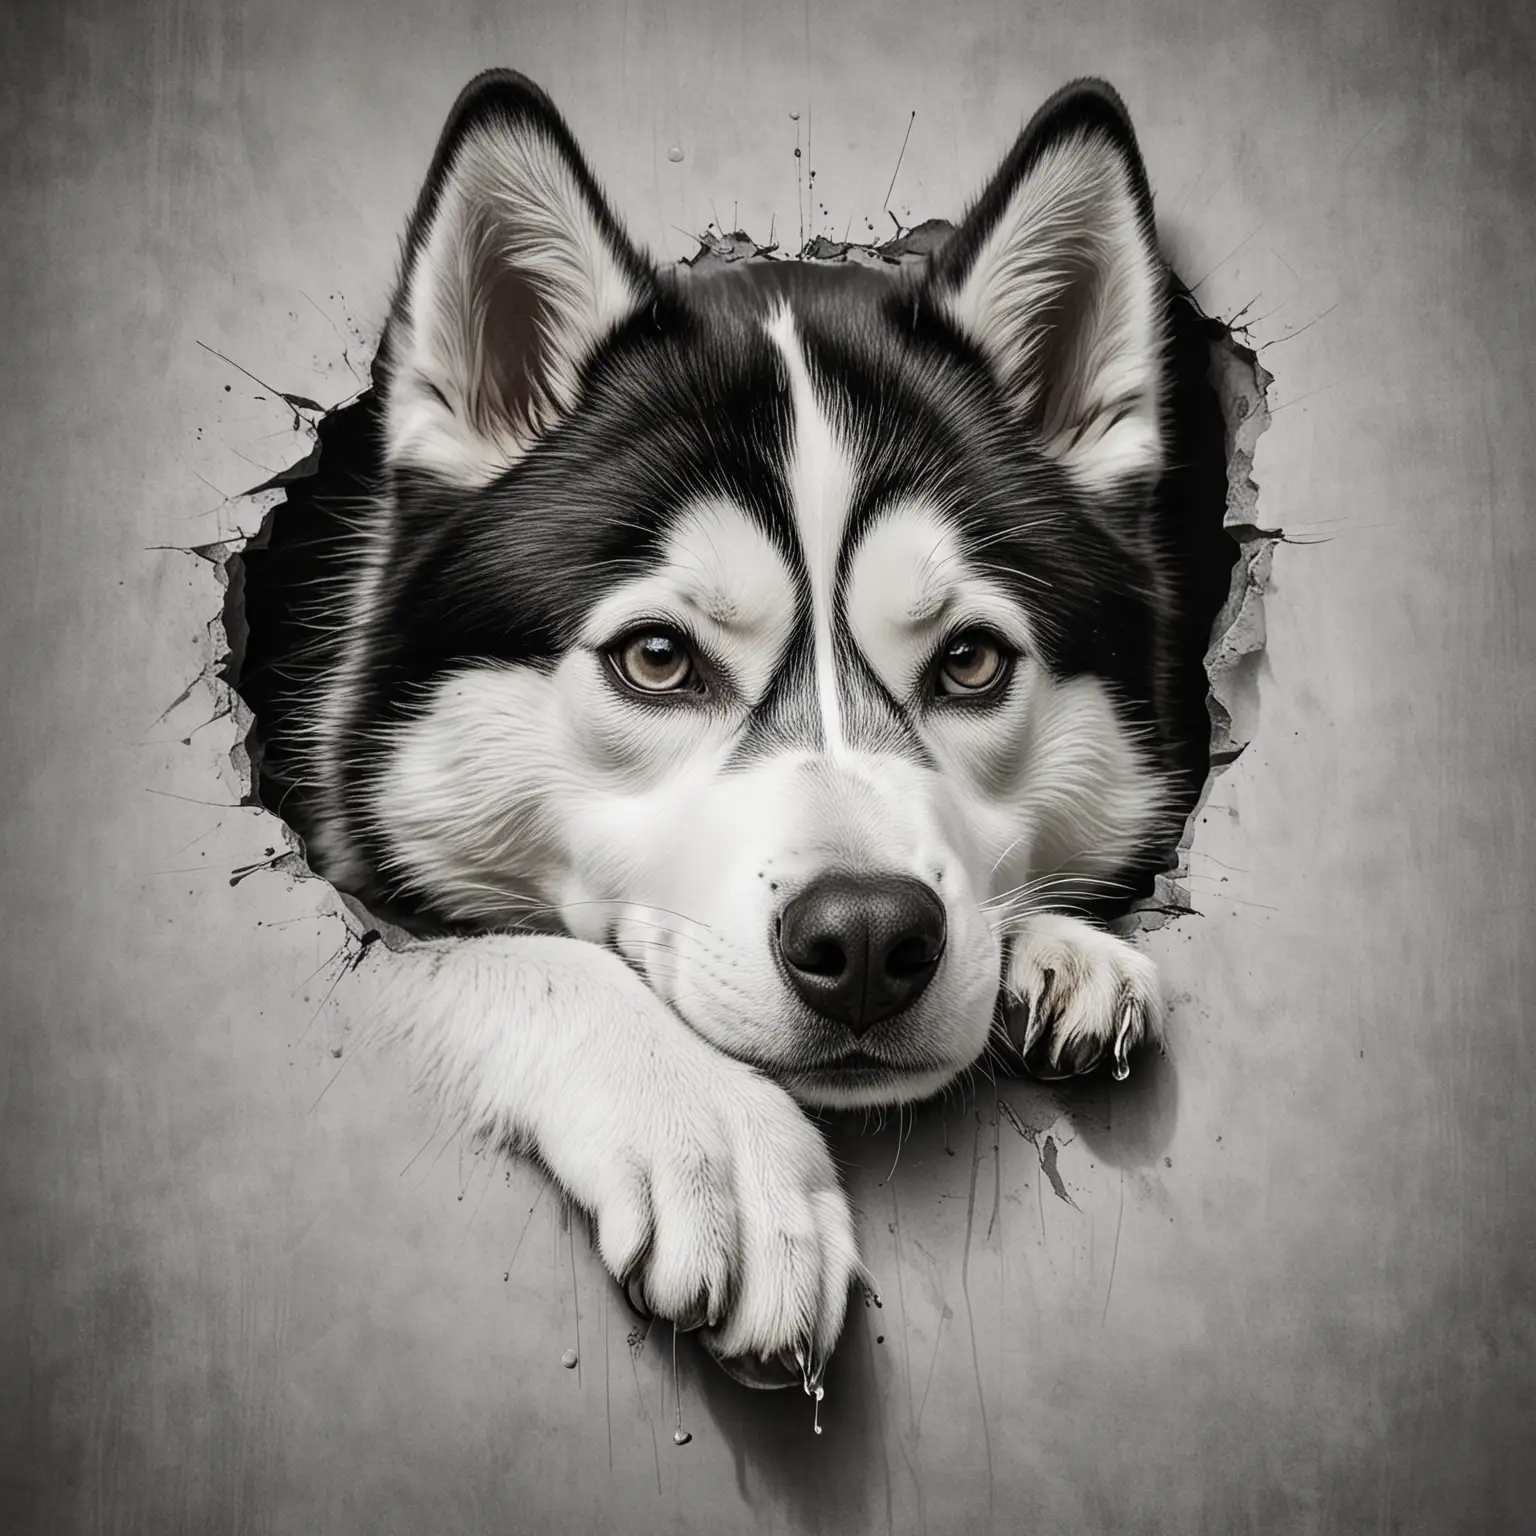 a black and white illustration of a Siberian Husky
 dog’s head and front paws resting over a horizontal line, giving the impression that the dog is peeking over a surface. The stylized artwork features bold lines and contrasting areas of black and white, creating an interesting visual effect. The dog appears to be a breed with pointed ears.